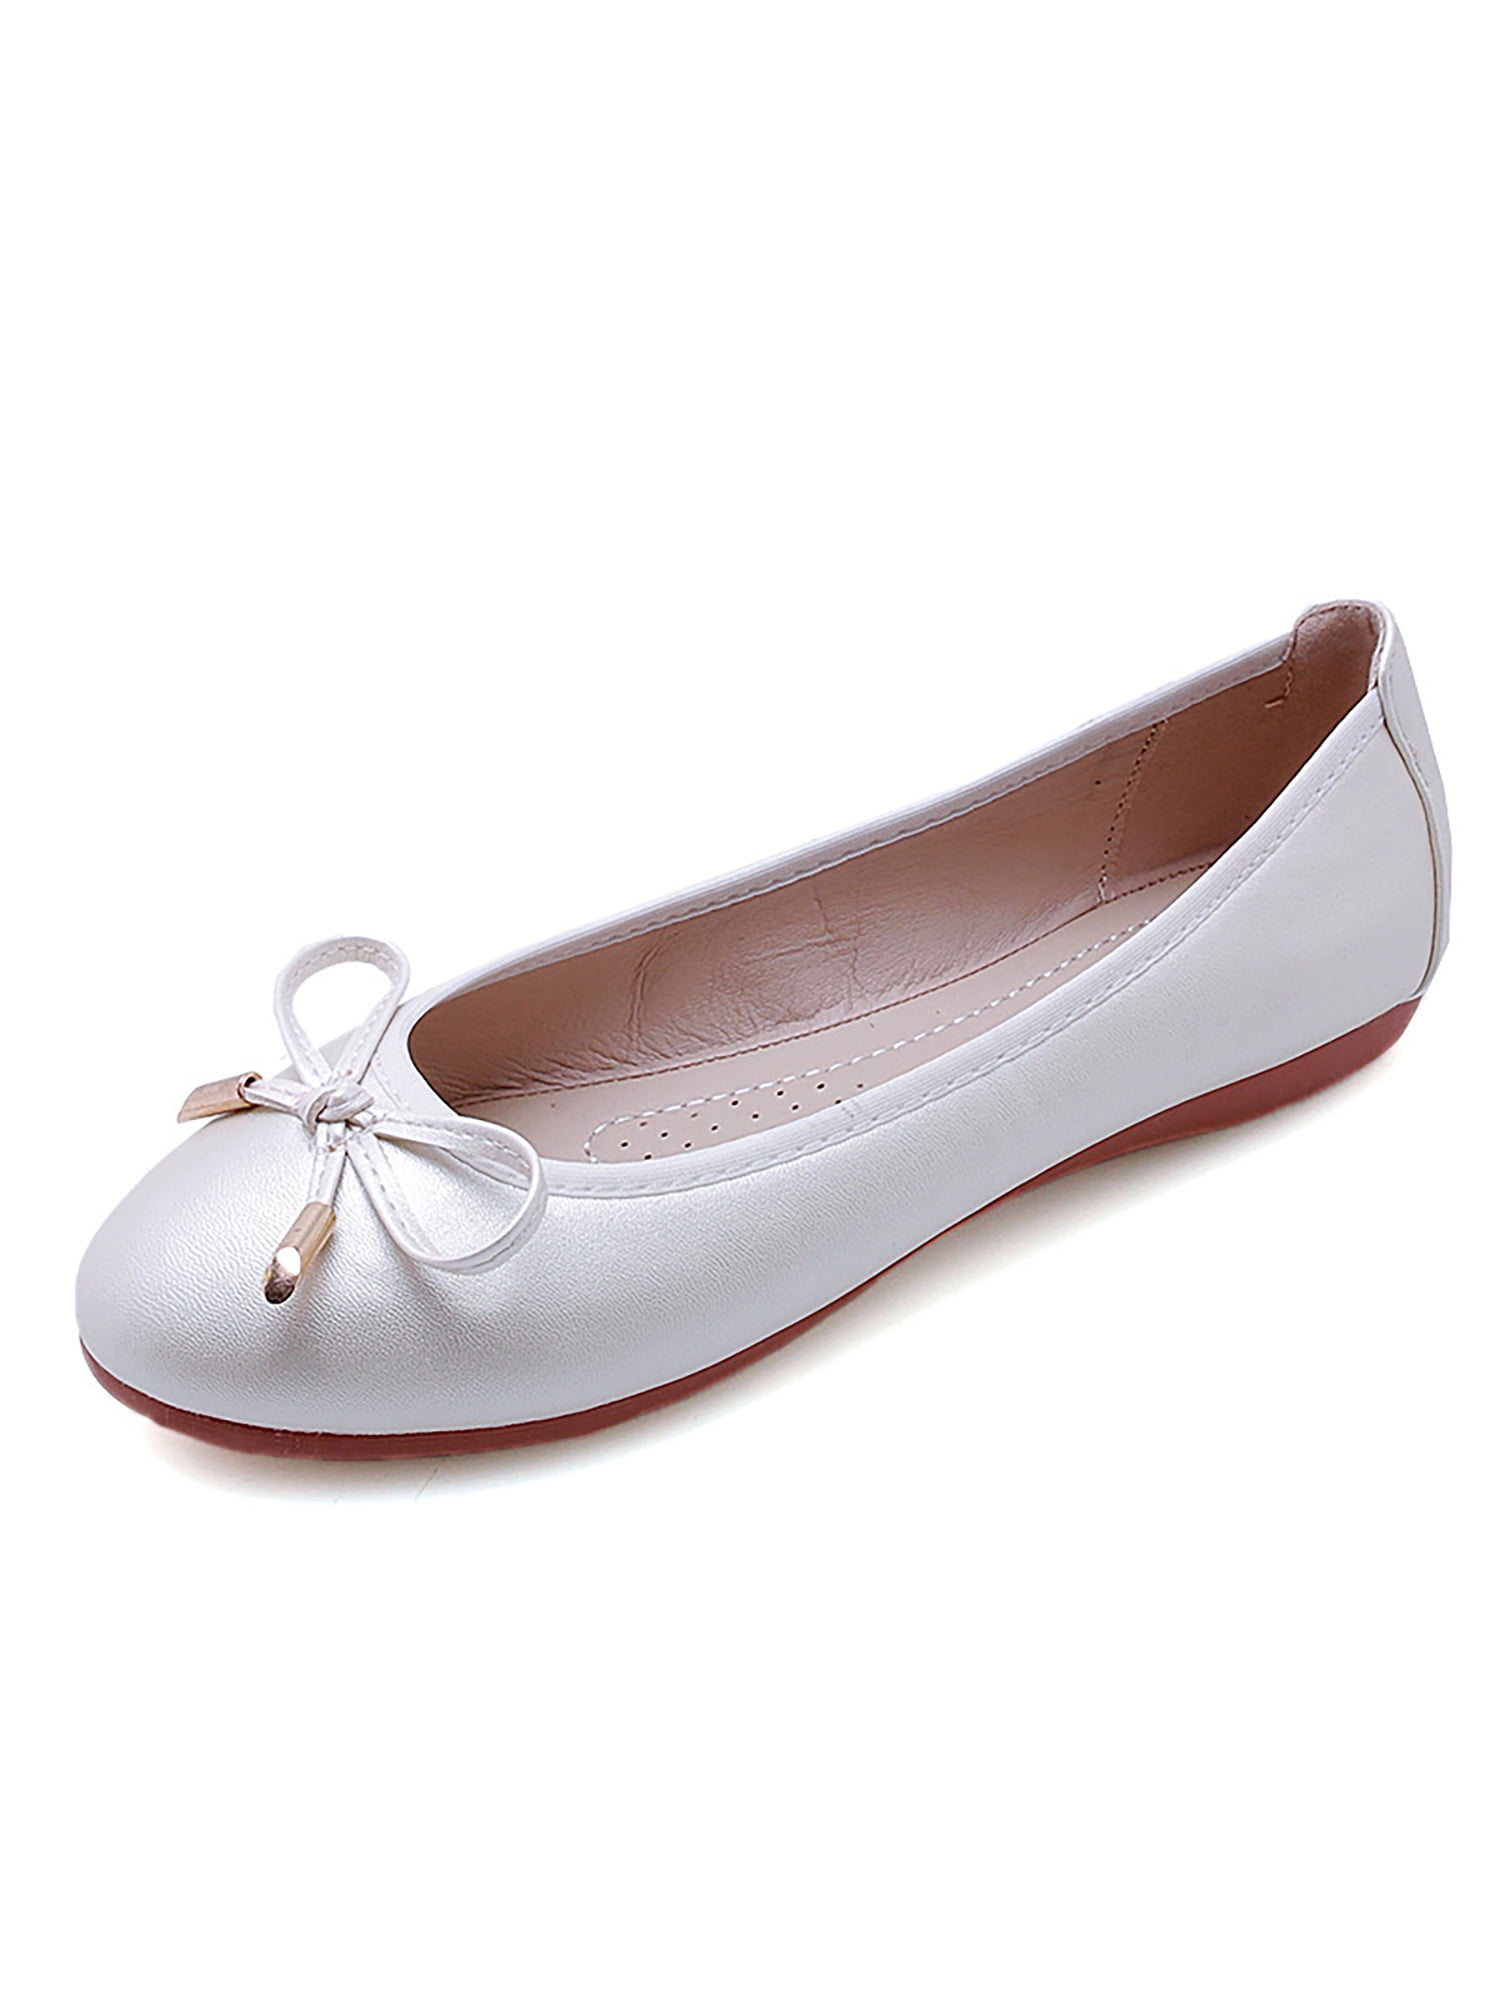 Women Bowknot Faux Leather Ballet Dress Flat Shoes Loafers Party Working Pumps 